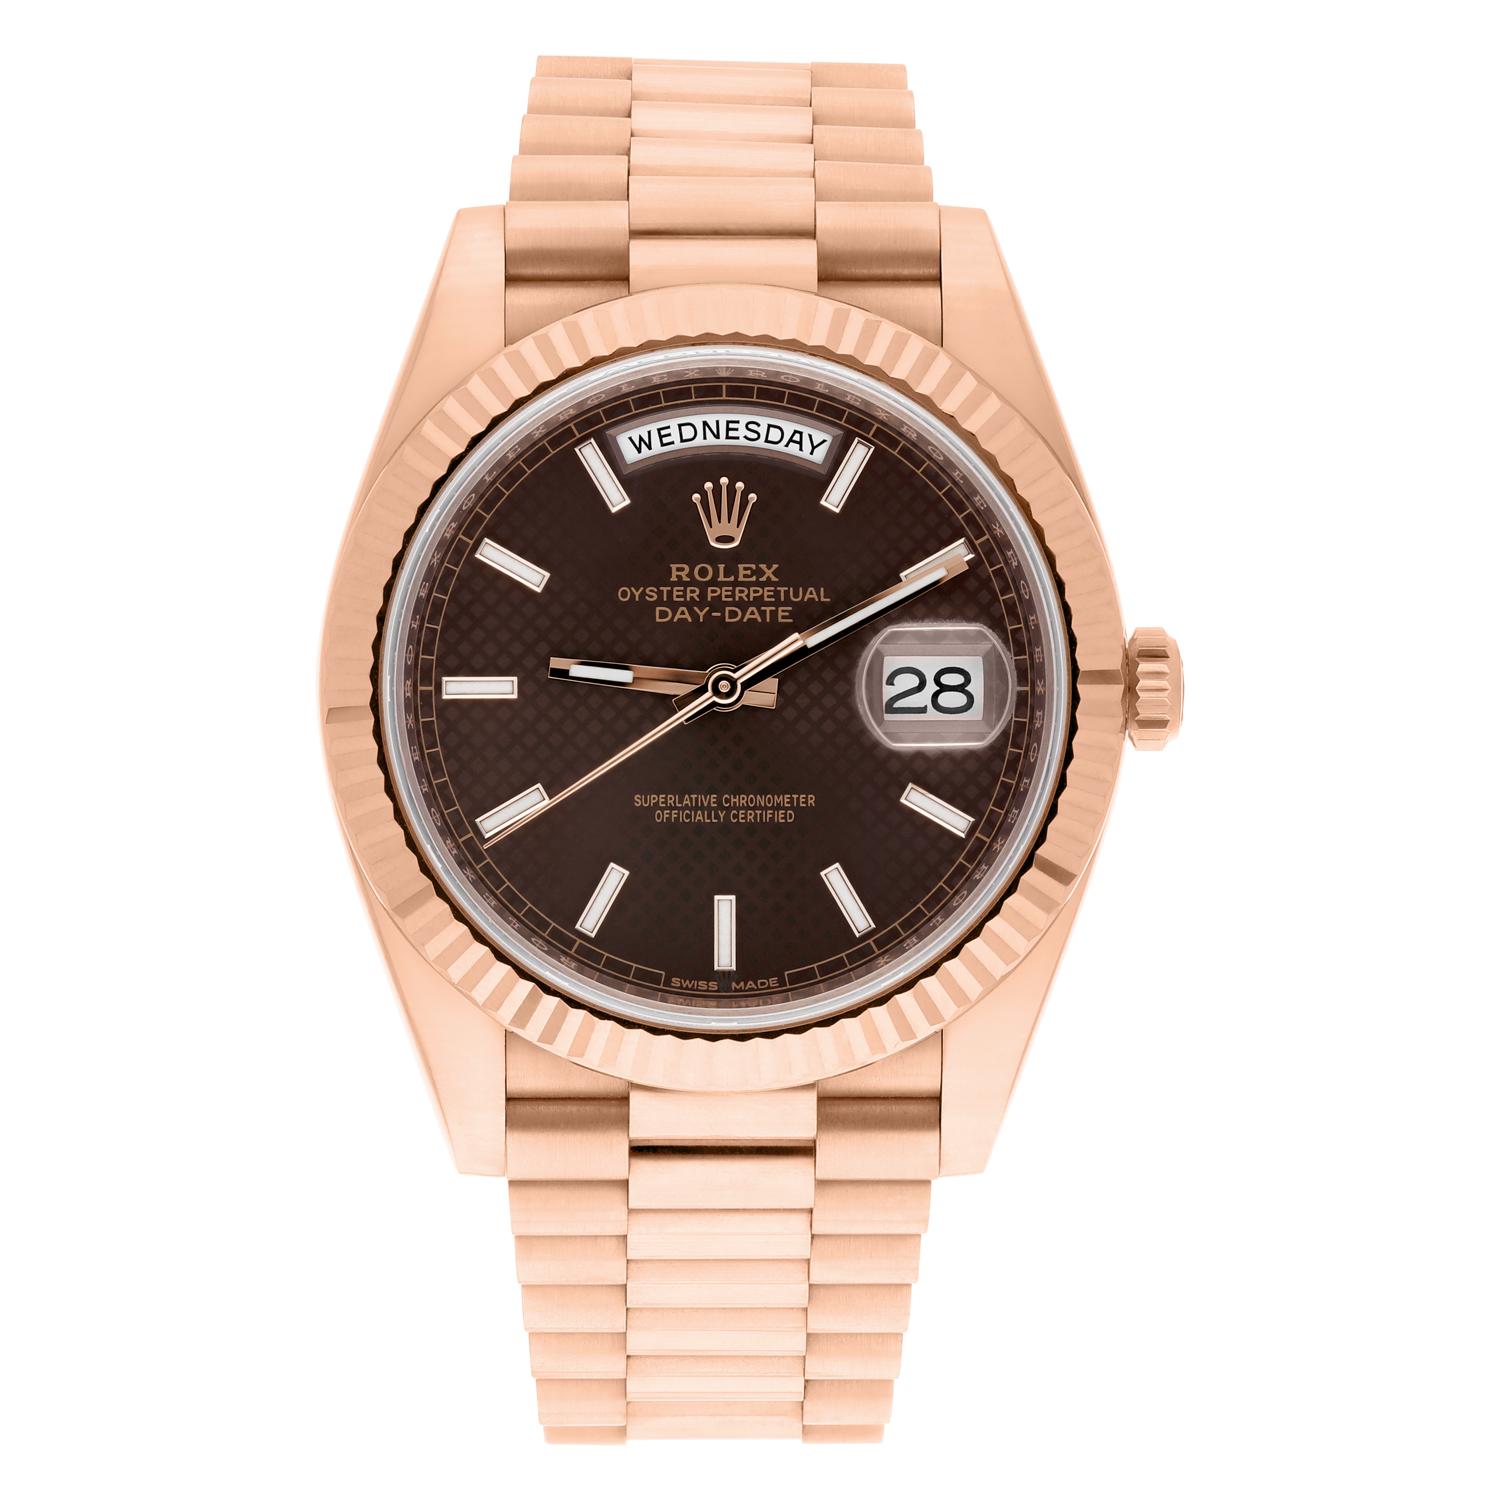 This Rolex Day-Date wristwatch features a stunning 40mm rose gold case and a unique chocolate motif dial with honeycomb pattern and stick indexes. The President band/strap complements the luxurious and classic style of this watch. This mechanical